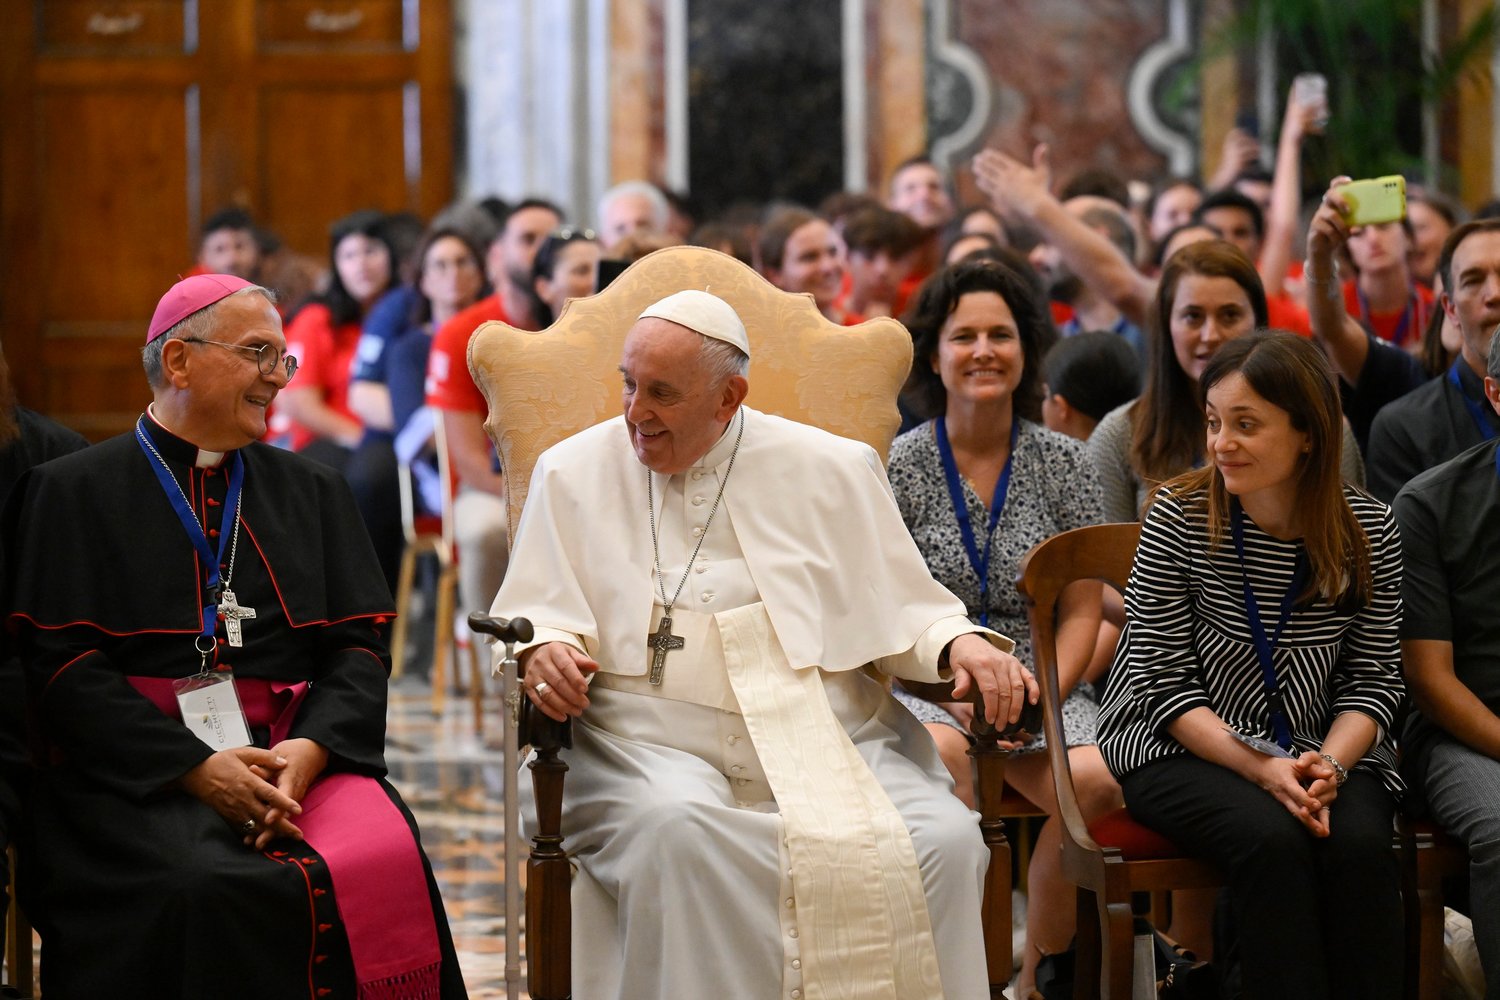 Pope Francis is seated next to an unidentified bishop as he leads an audience with young people participating in a summer camp program sponsored by Alpha International, at the Vatican Aug. 5.